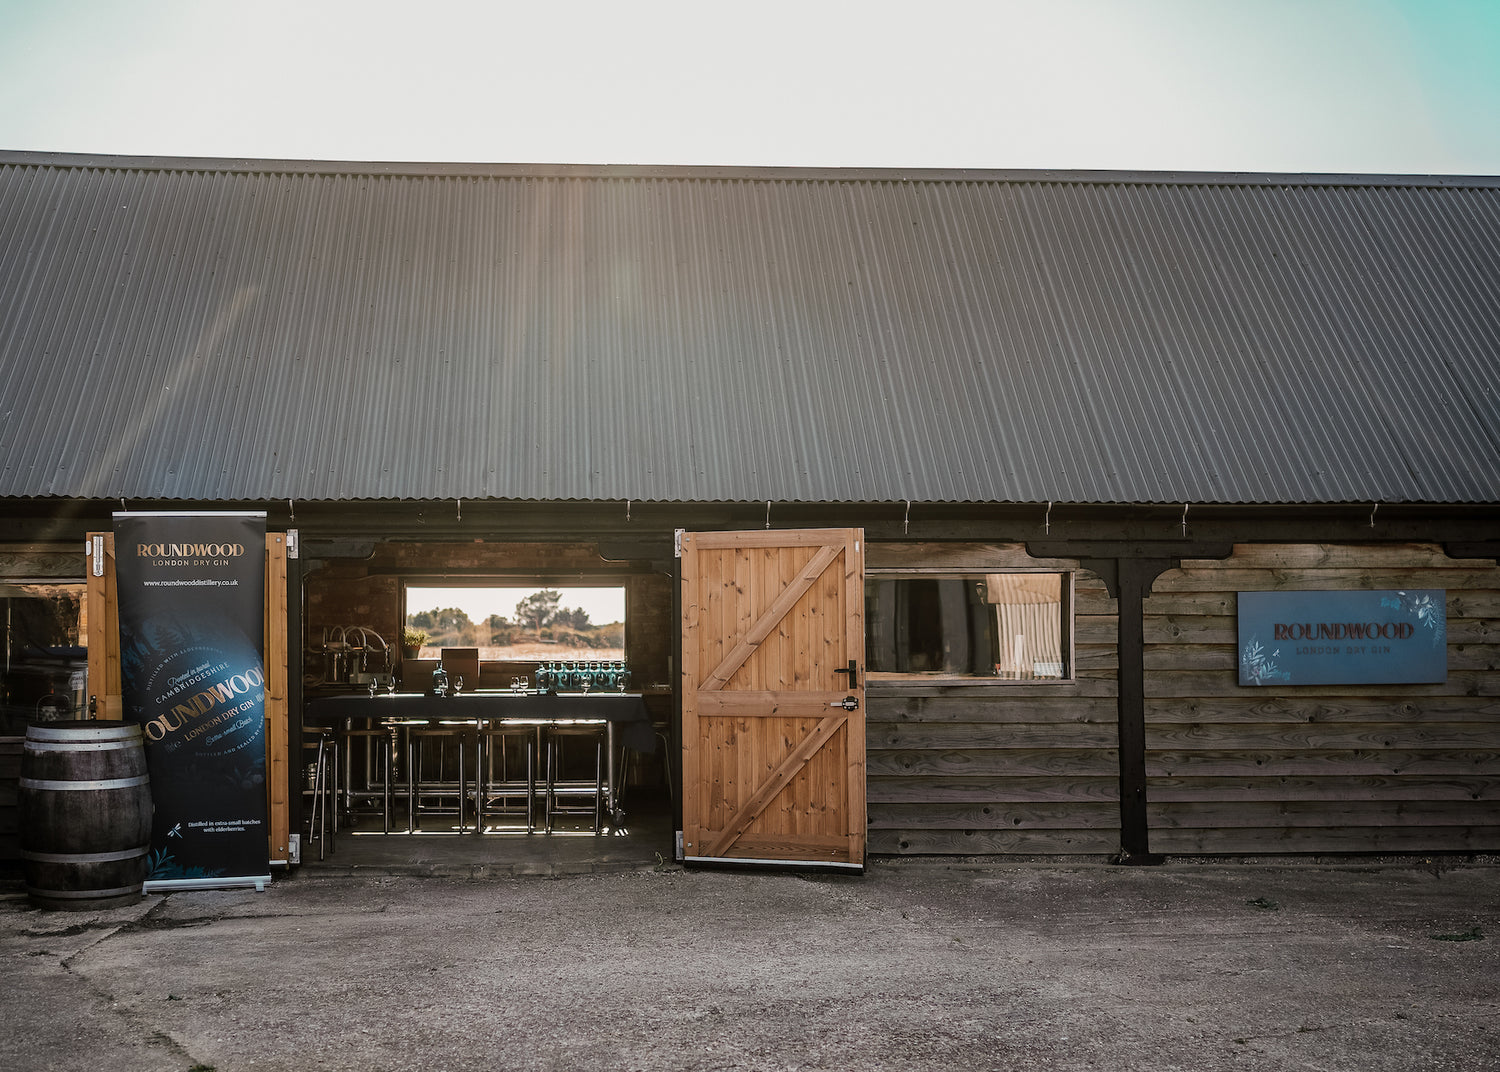 Exterior of the distillery, wooden barn with doors open wide and light shining through the window opposite across table laid for gin tasting event